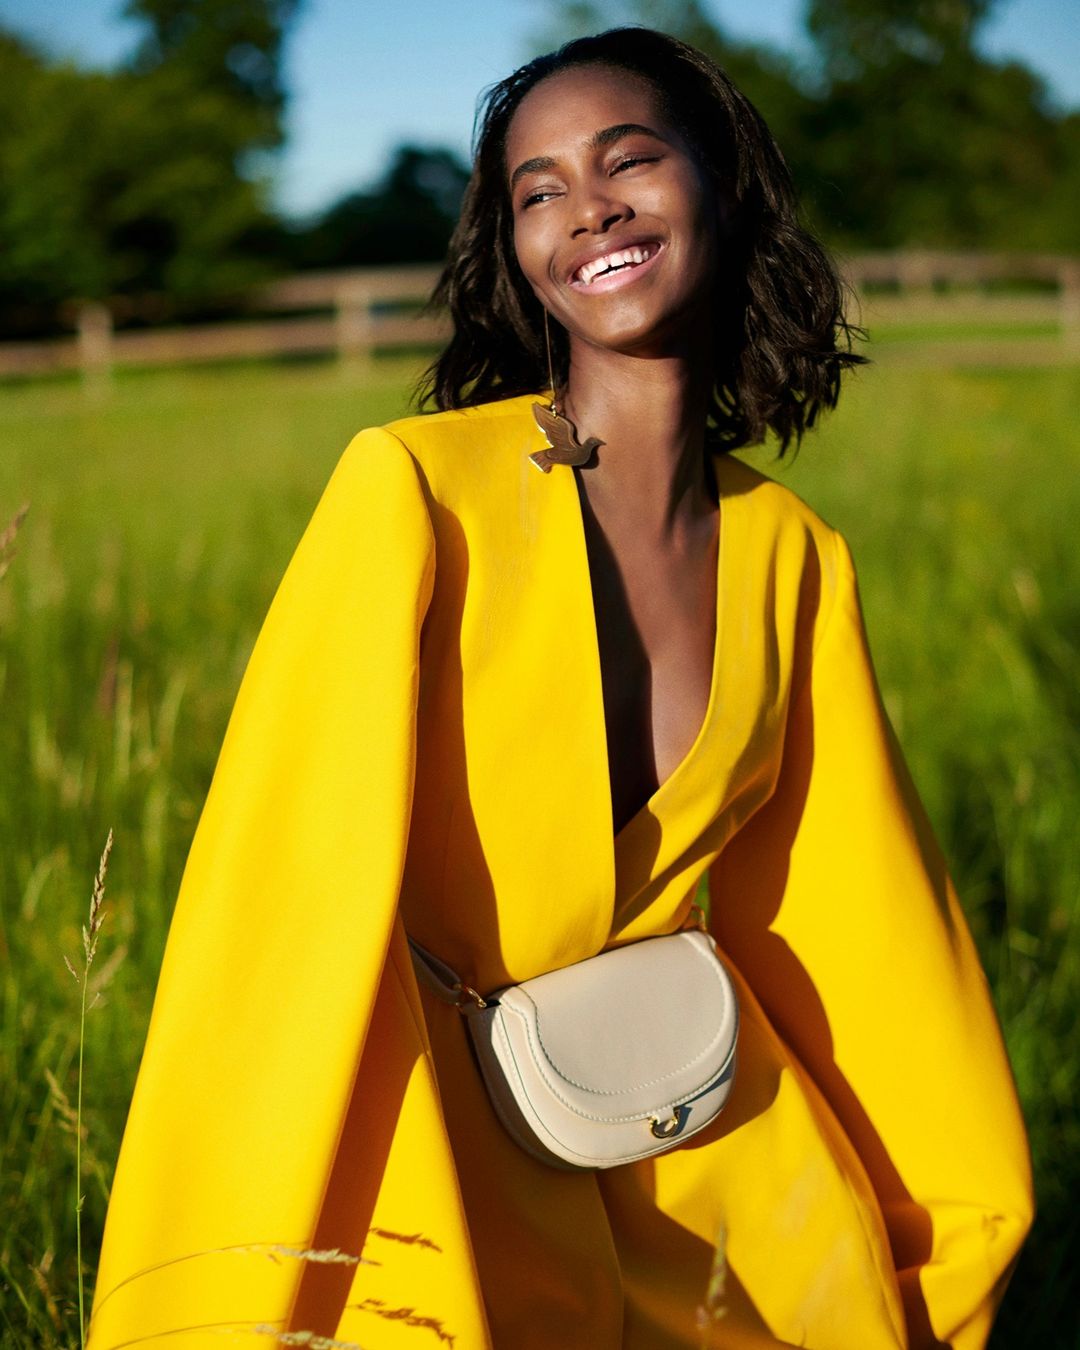 CAROLINA HERRERA - Happy days! A striking yellow coat from our Fall 2020 collection and a #CHCharroInsignia bag in beige. Shot by @paul_maffi at the country home of Creative Director @wesgordon in Con...